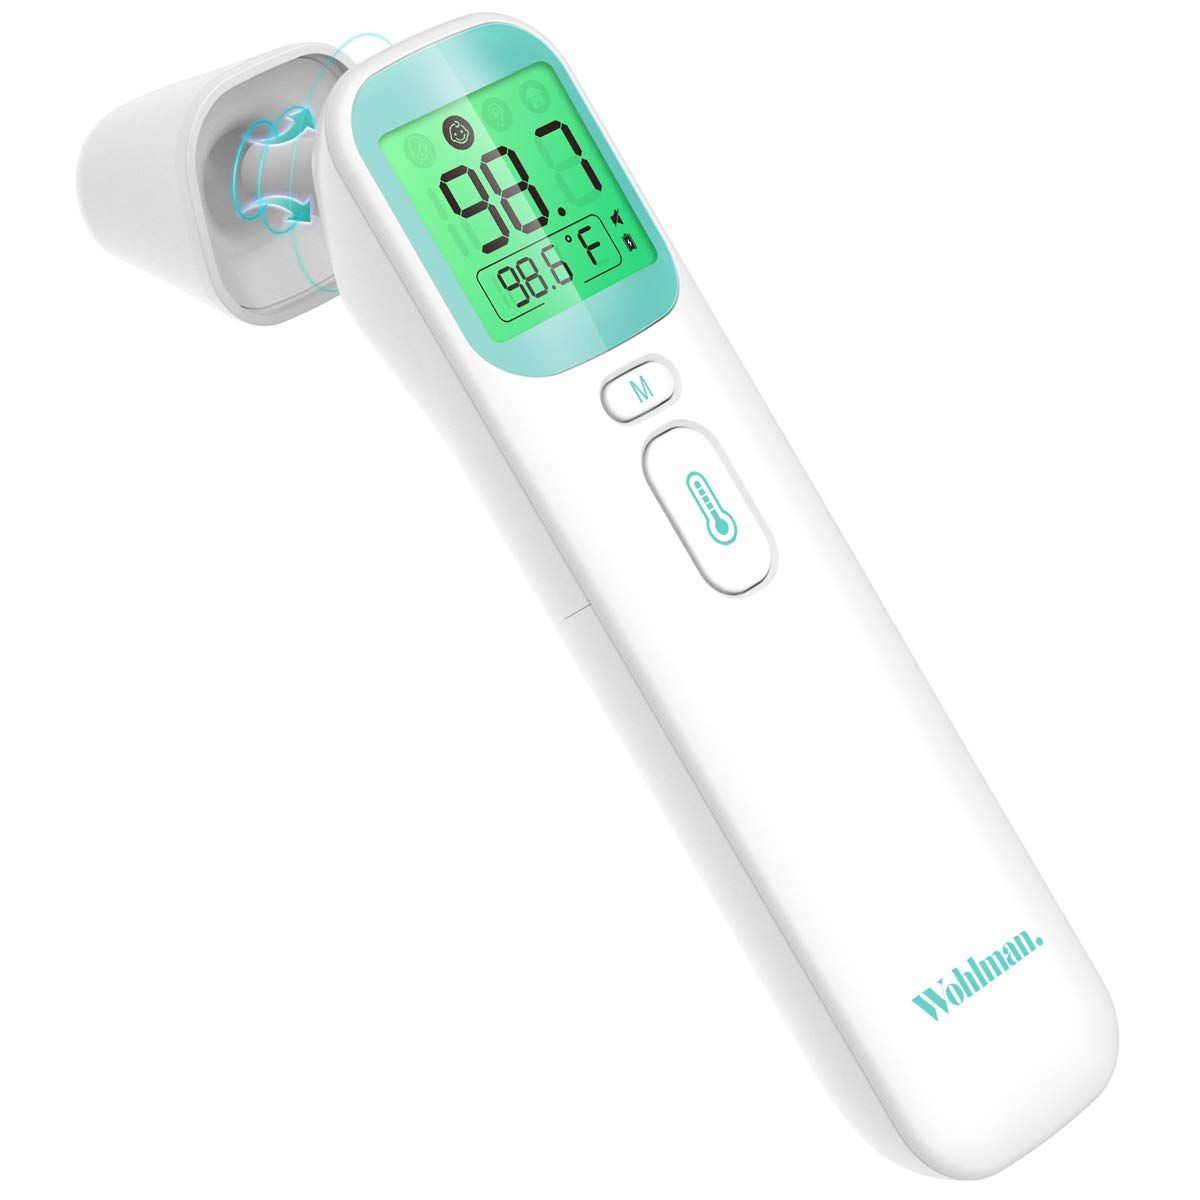 Wohlman Non-Contact IR Thermometer